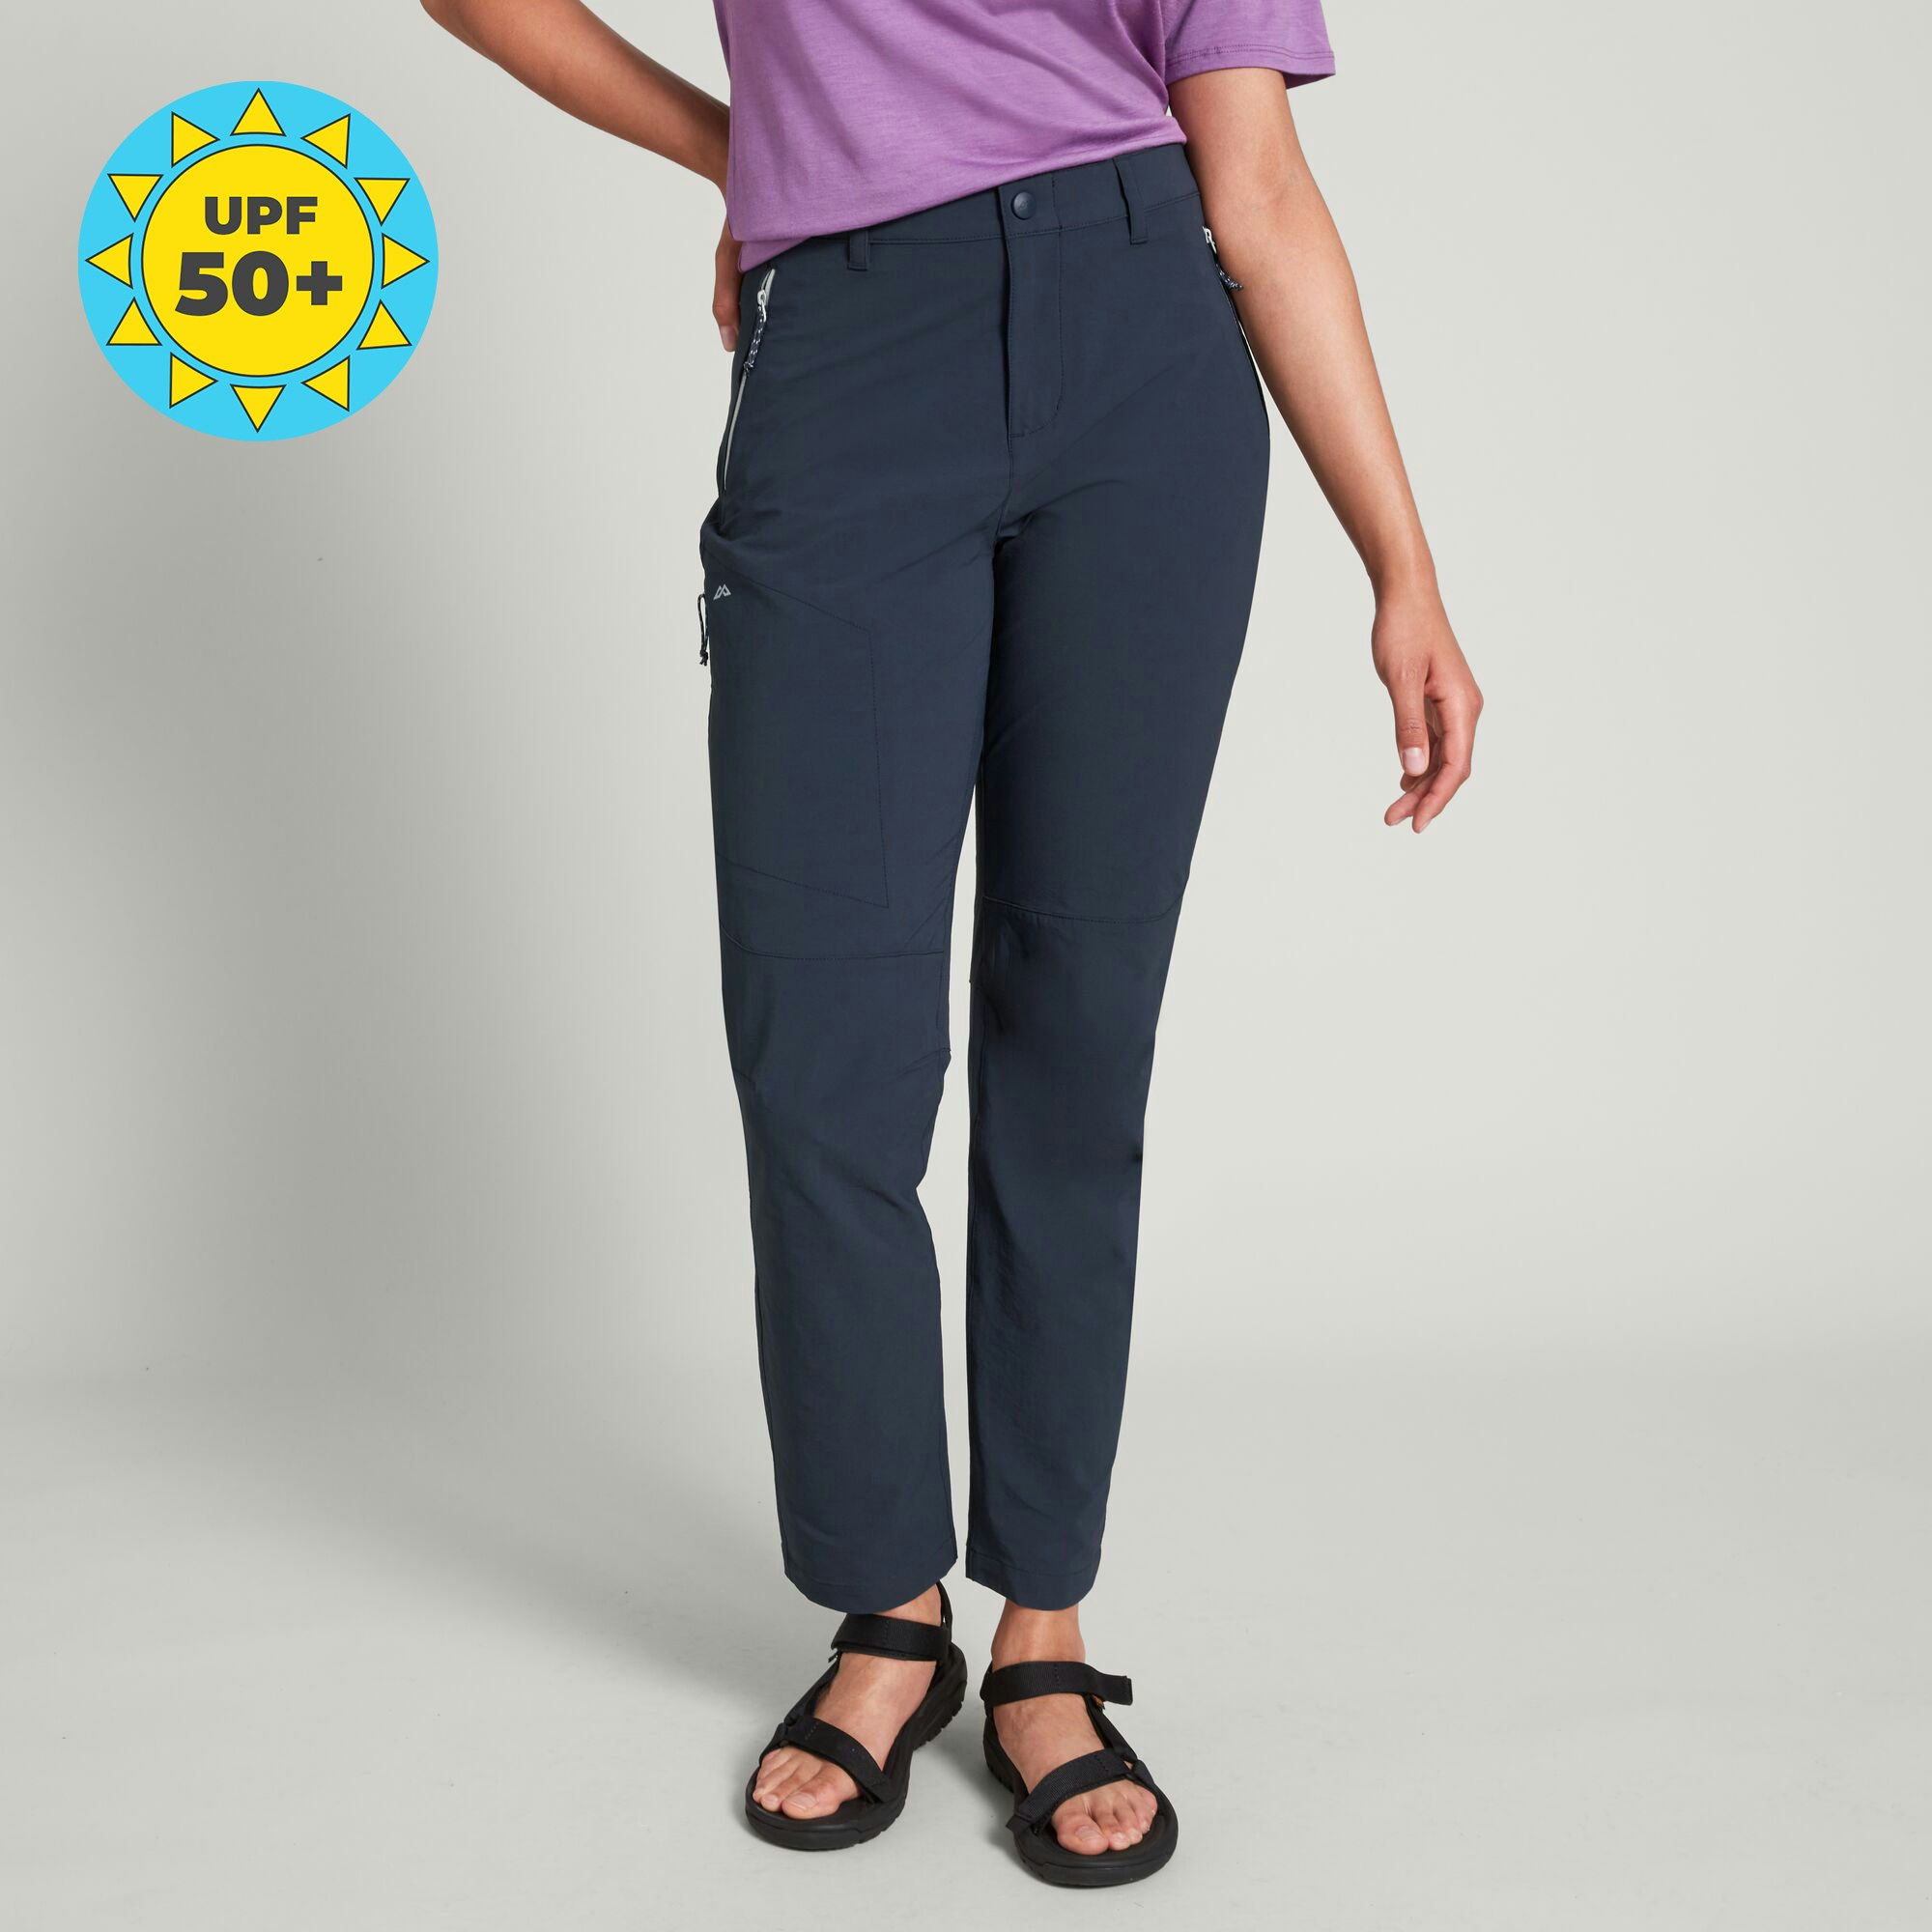 YSENTO Womens Outdoor Walking Hiking Trousers Lightweight Quick Dry Water  Resistant Trekking Pants with Zipper Pockets(Dusty Purple,XS) :  Amazon.co.uk: Fashion